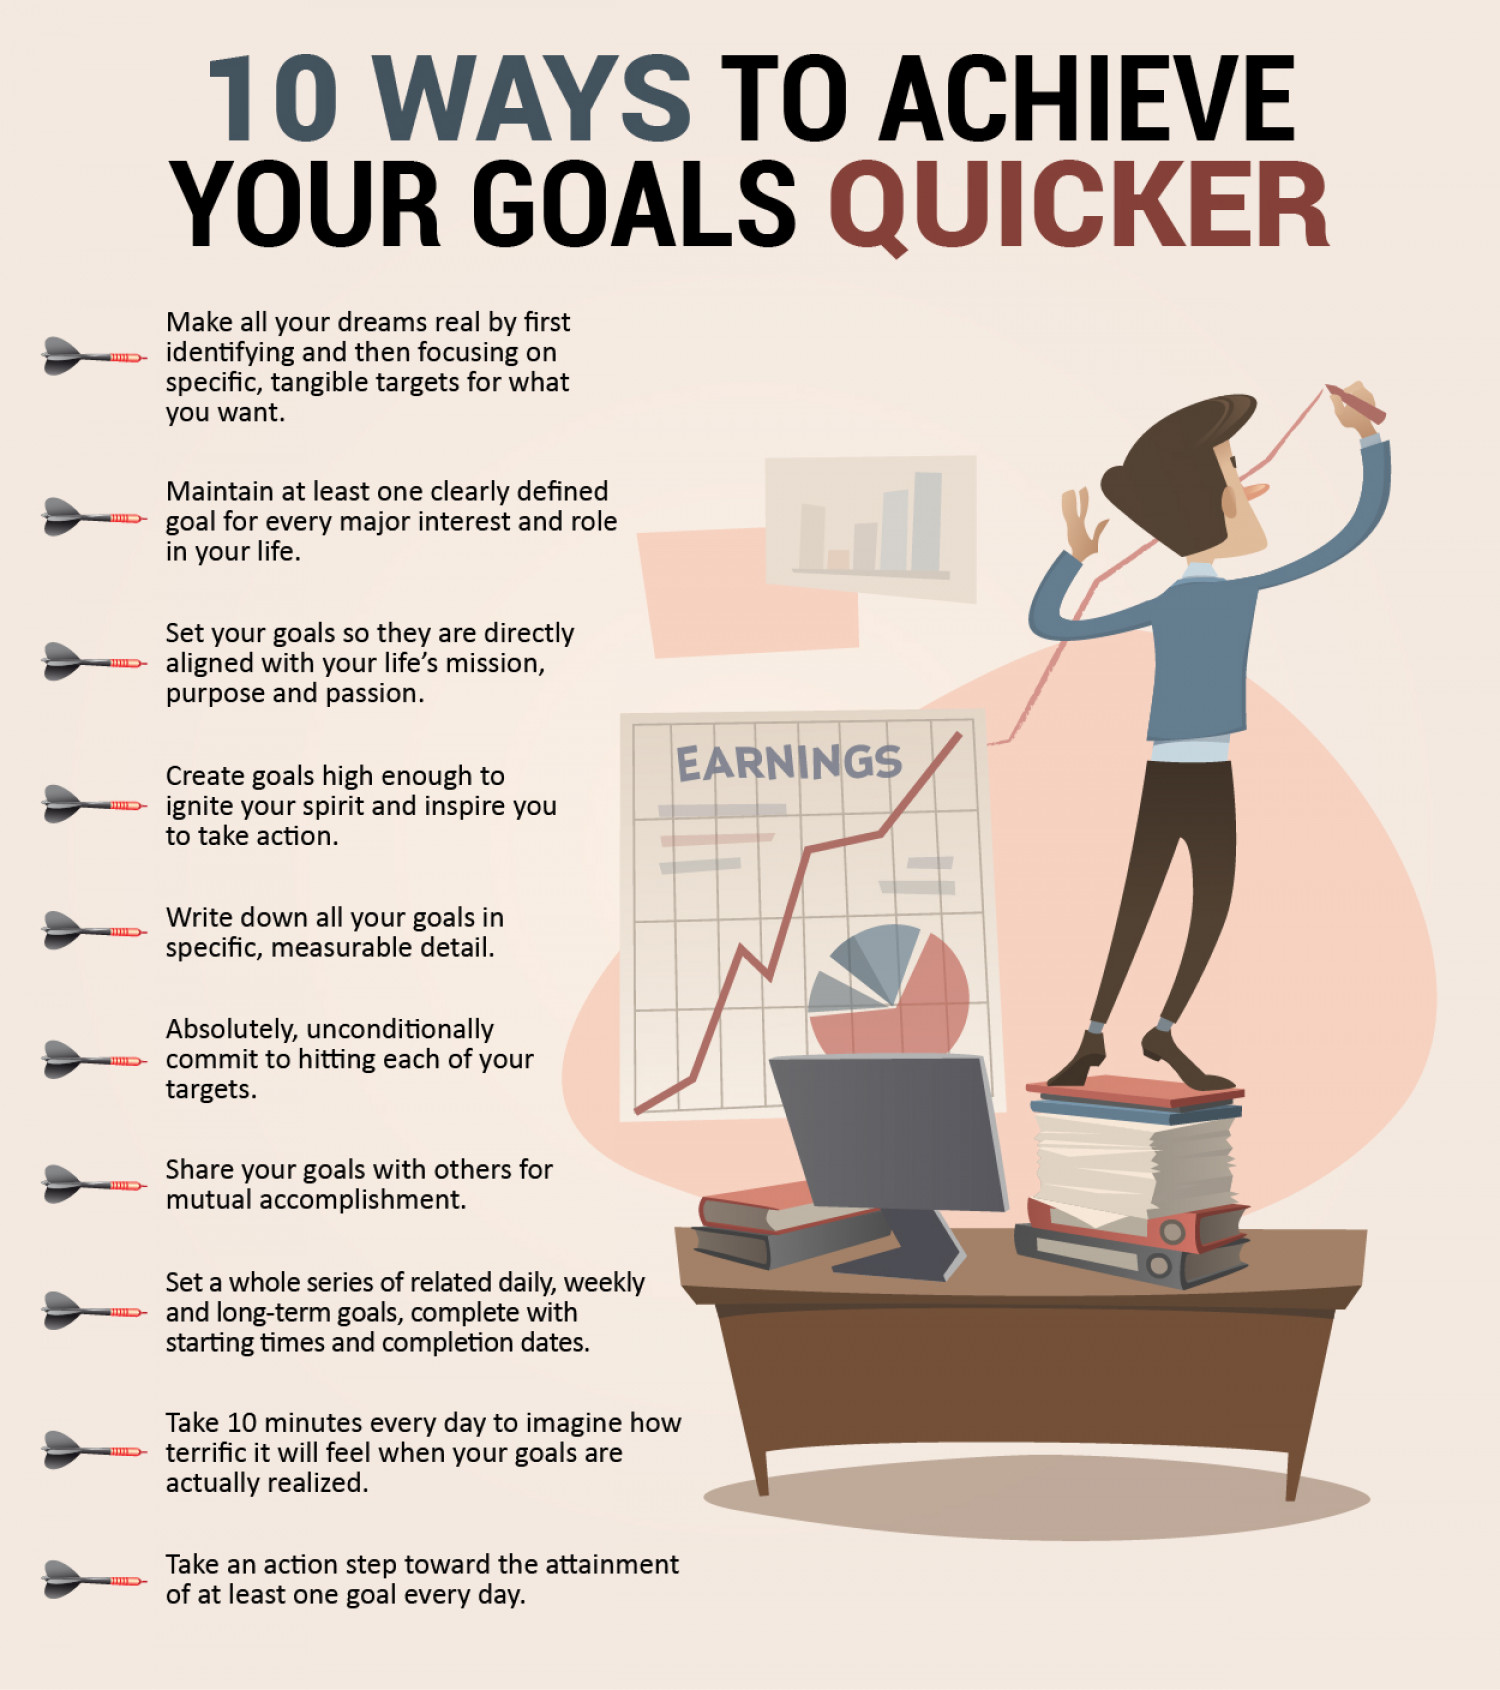 How to Reach Your Goals Quickly - 10 Easy Ways  Infographic